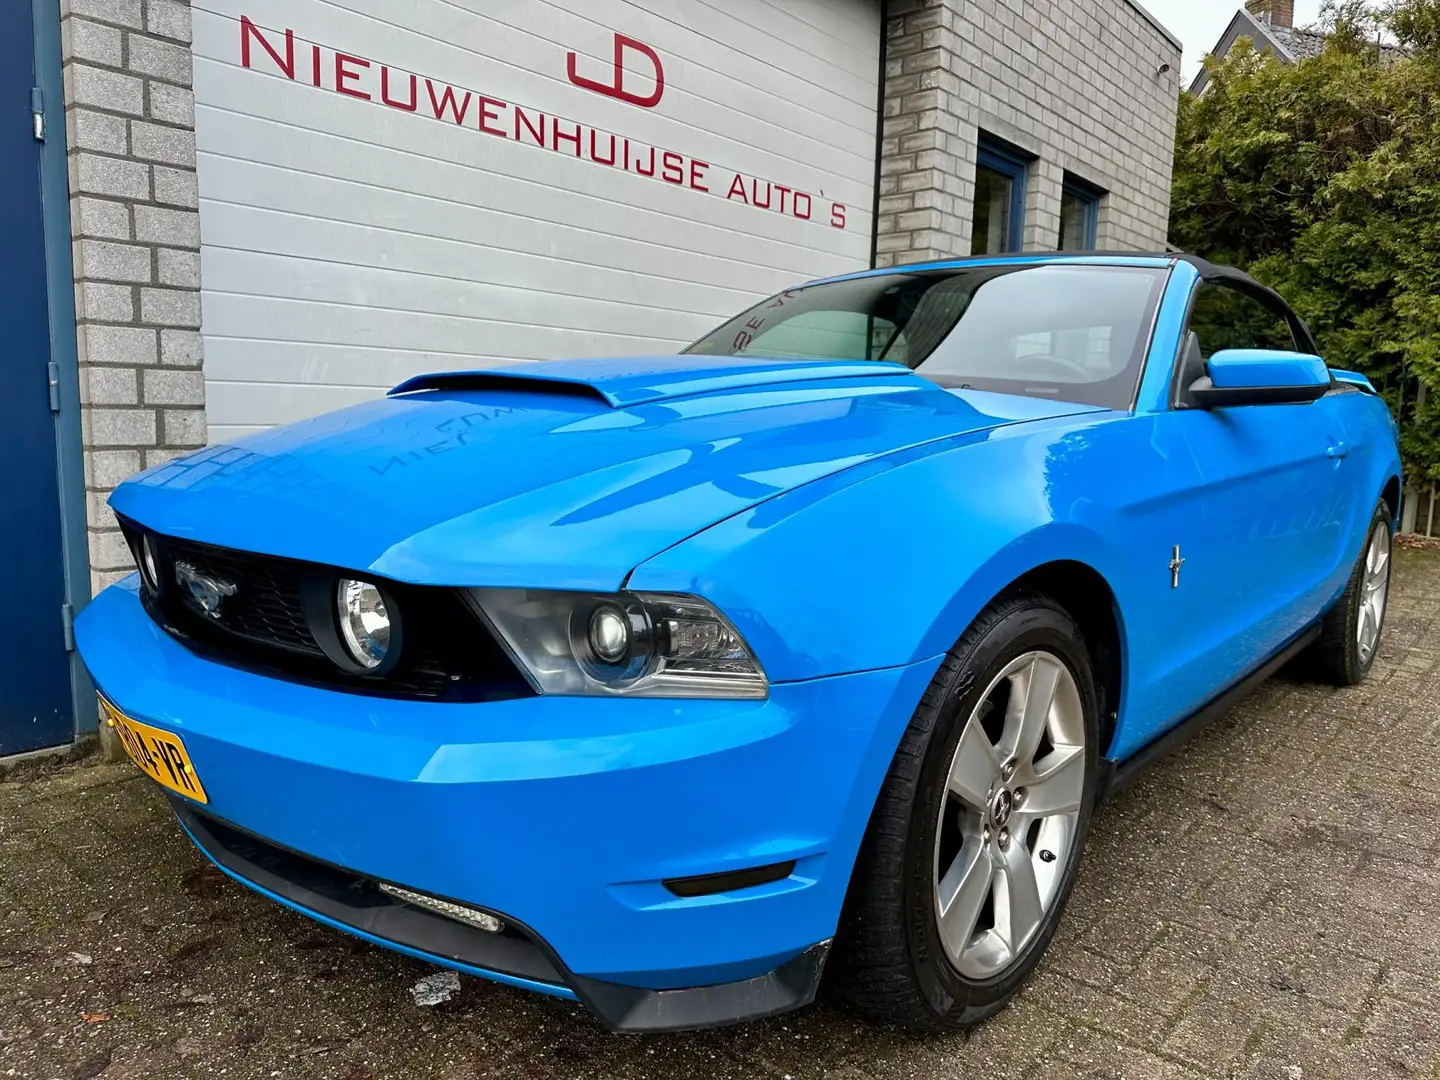 Ford Mustang 4.6 V8 automaat, nieuw model 2010!, youngtimer!! Niebieski - 1